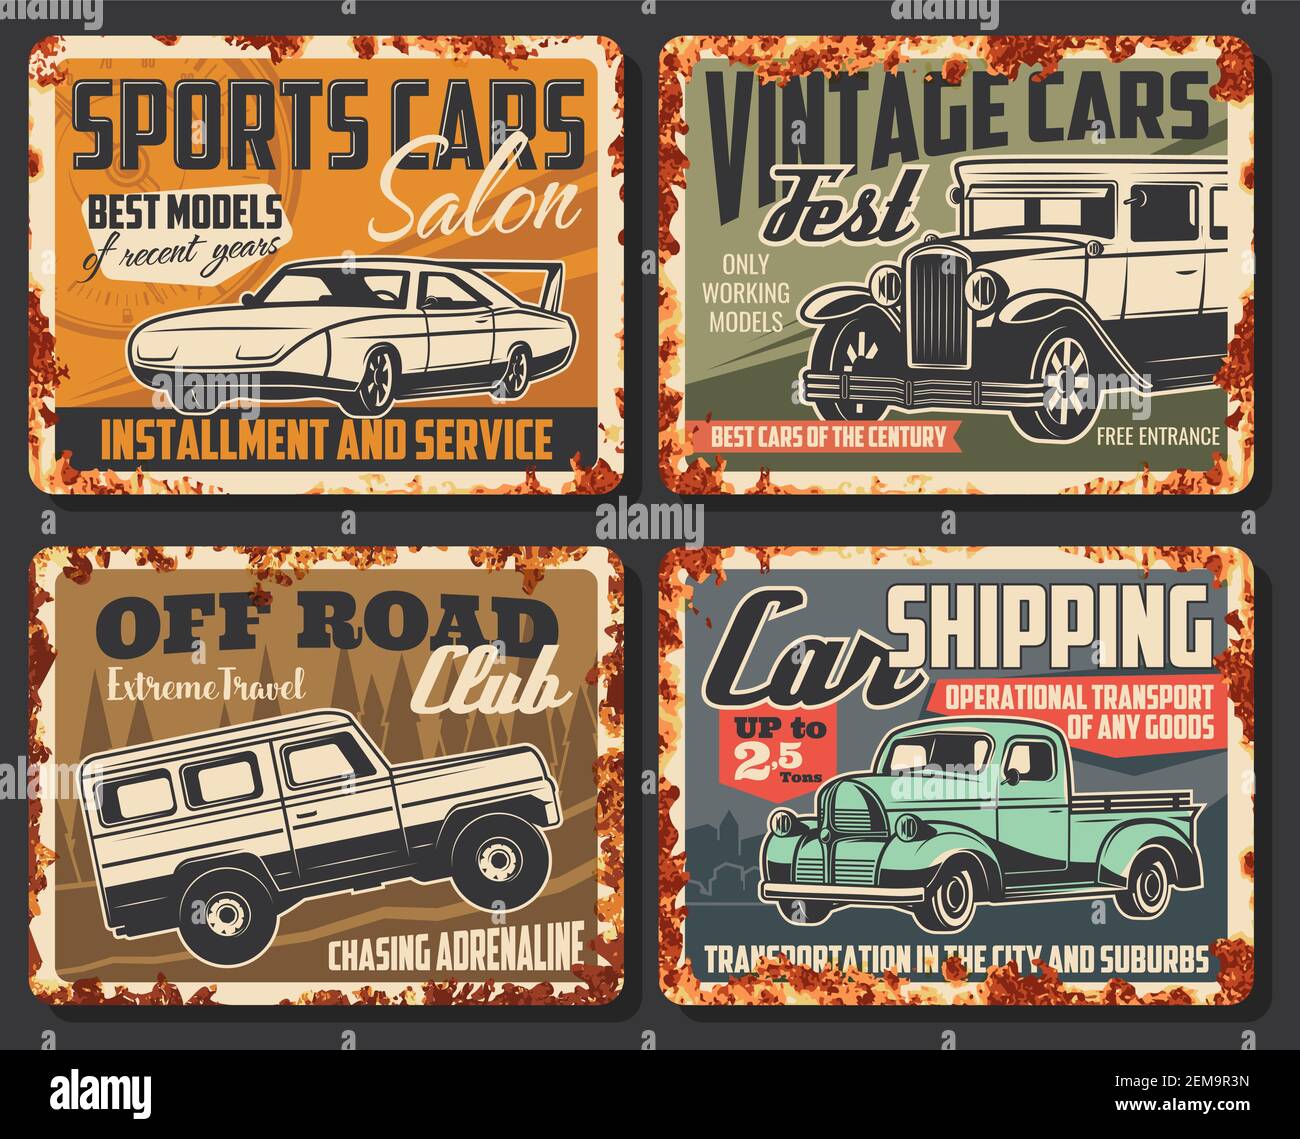 Vintage and sport cars vector rusty metal plates. Car service center, rarity vehicles show fest exhibition and sport motors salon, off-road extreme cl Stock Vector